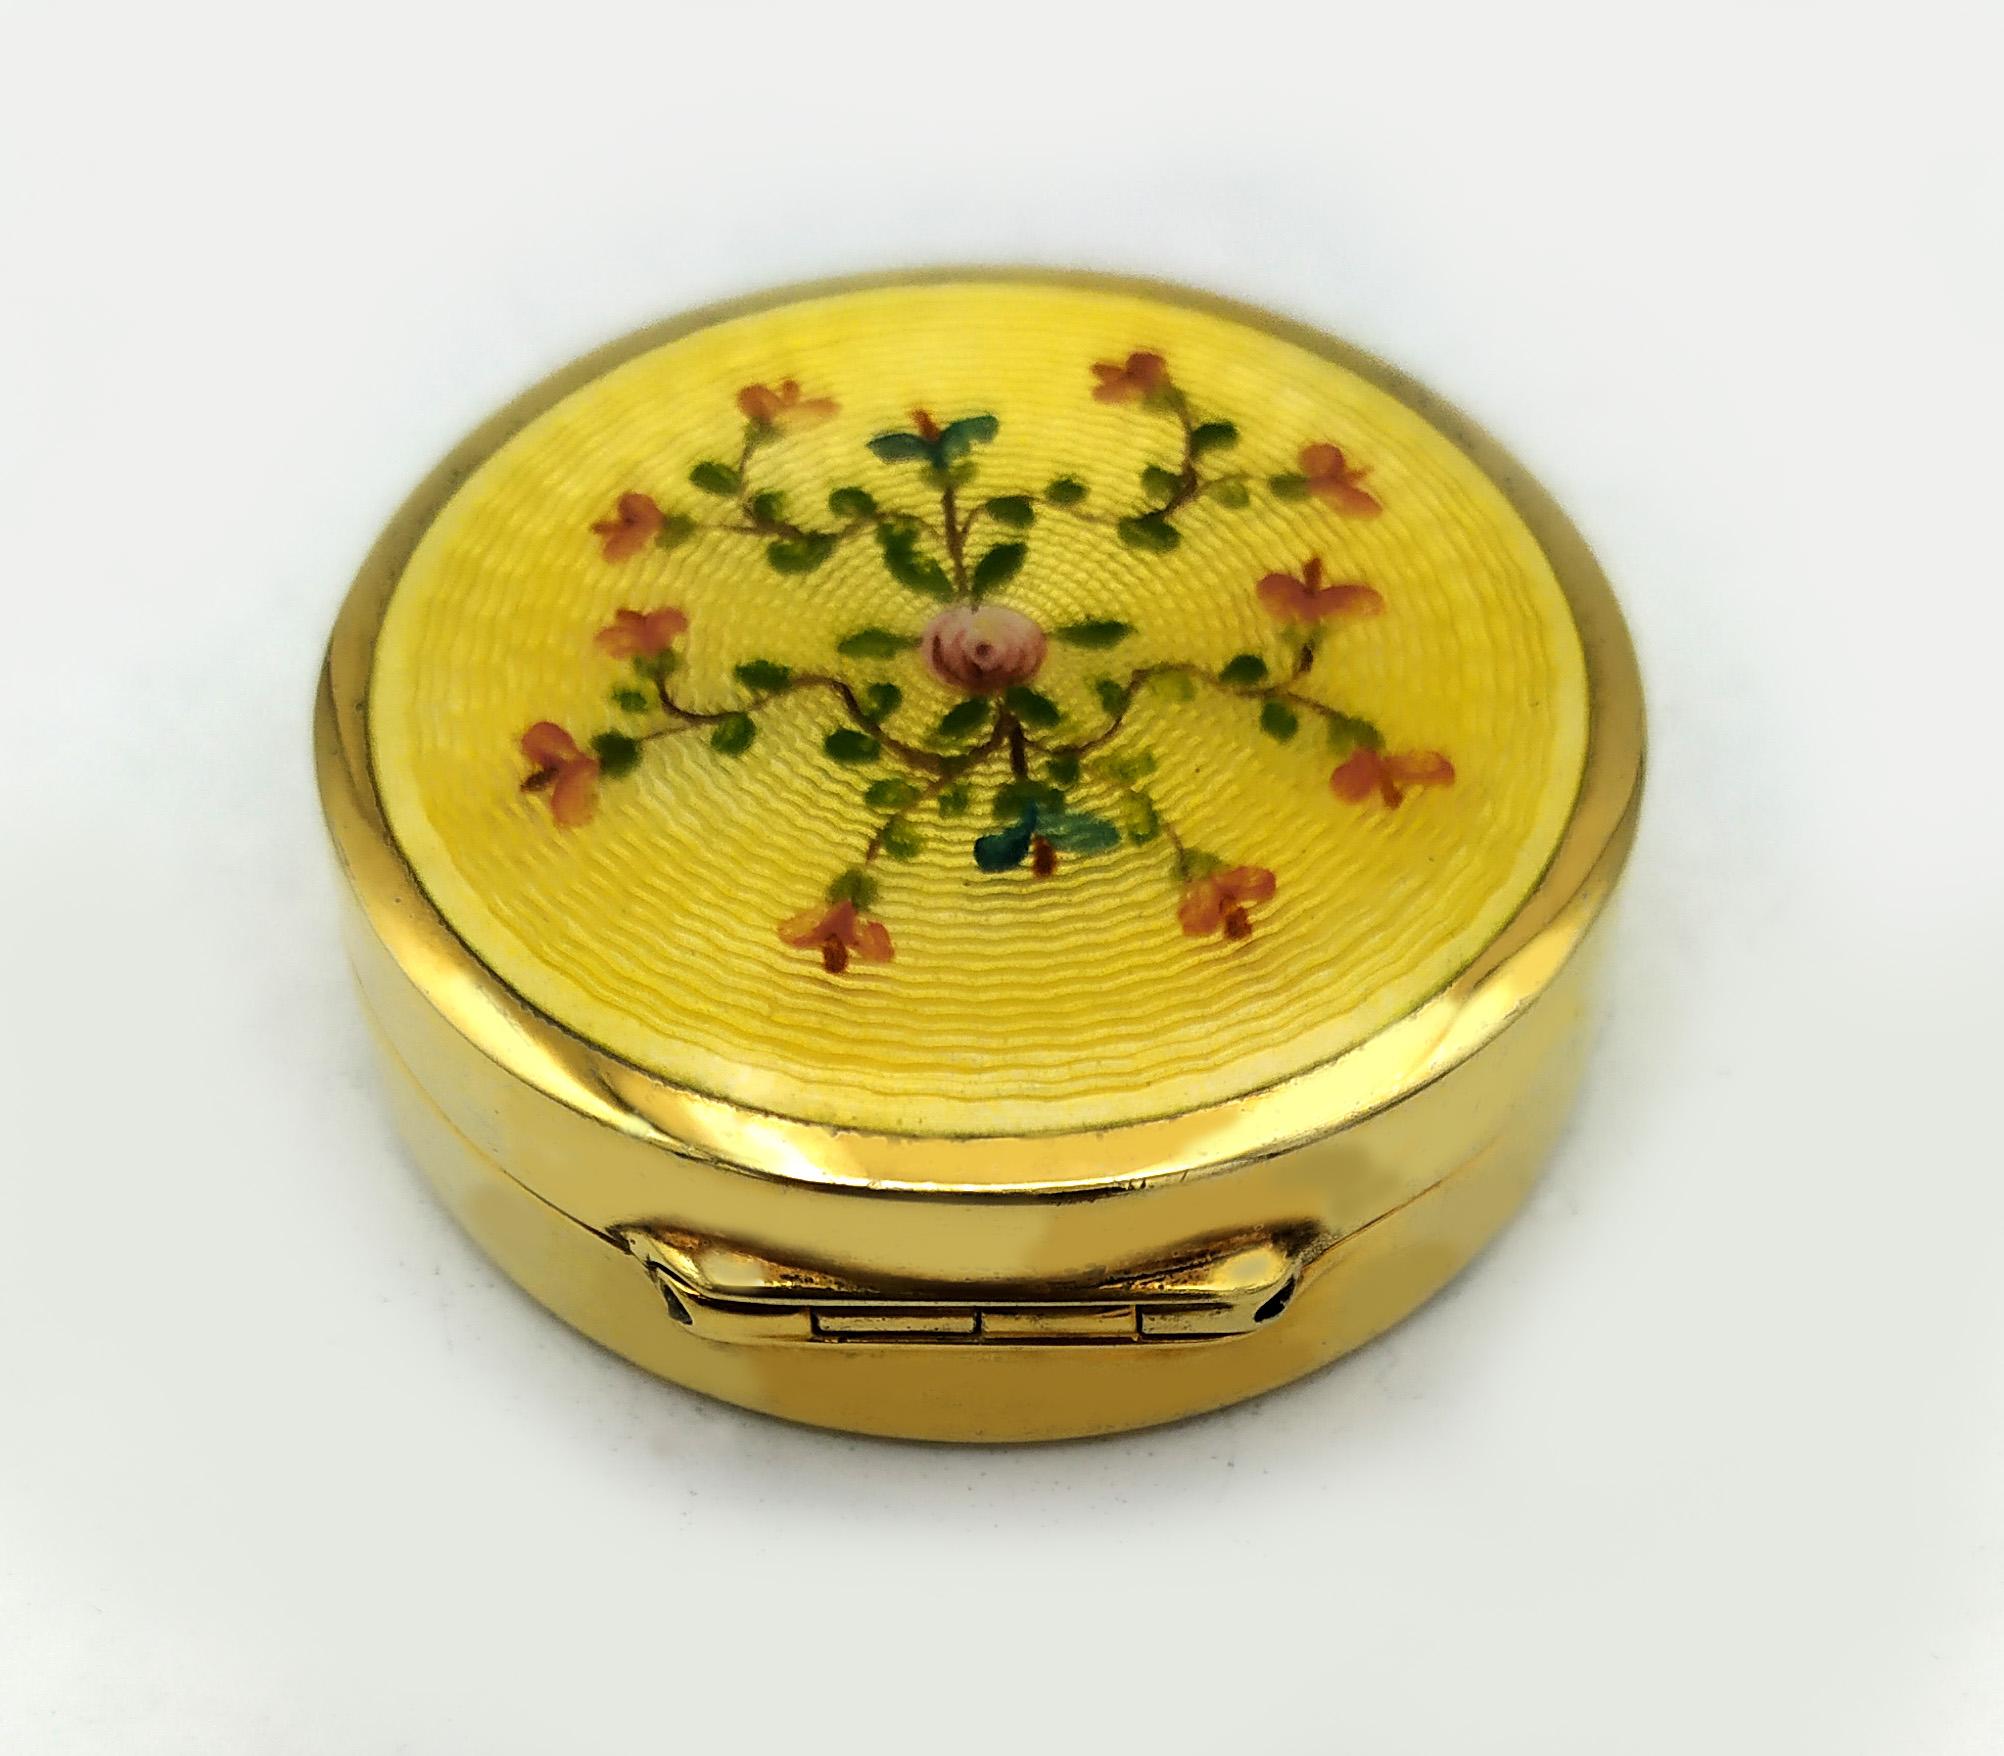 Pill Box Yellow floral miniature in Art Nouveau style Sterling Silver Salimbeni.Round pillbox in 925/1000 sterling silver gold plated with translucent fired enamels on guillochè, and hand-painted floral miniature. Viennese Art Nouveau style second